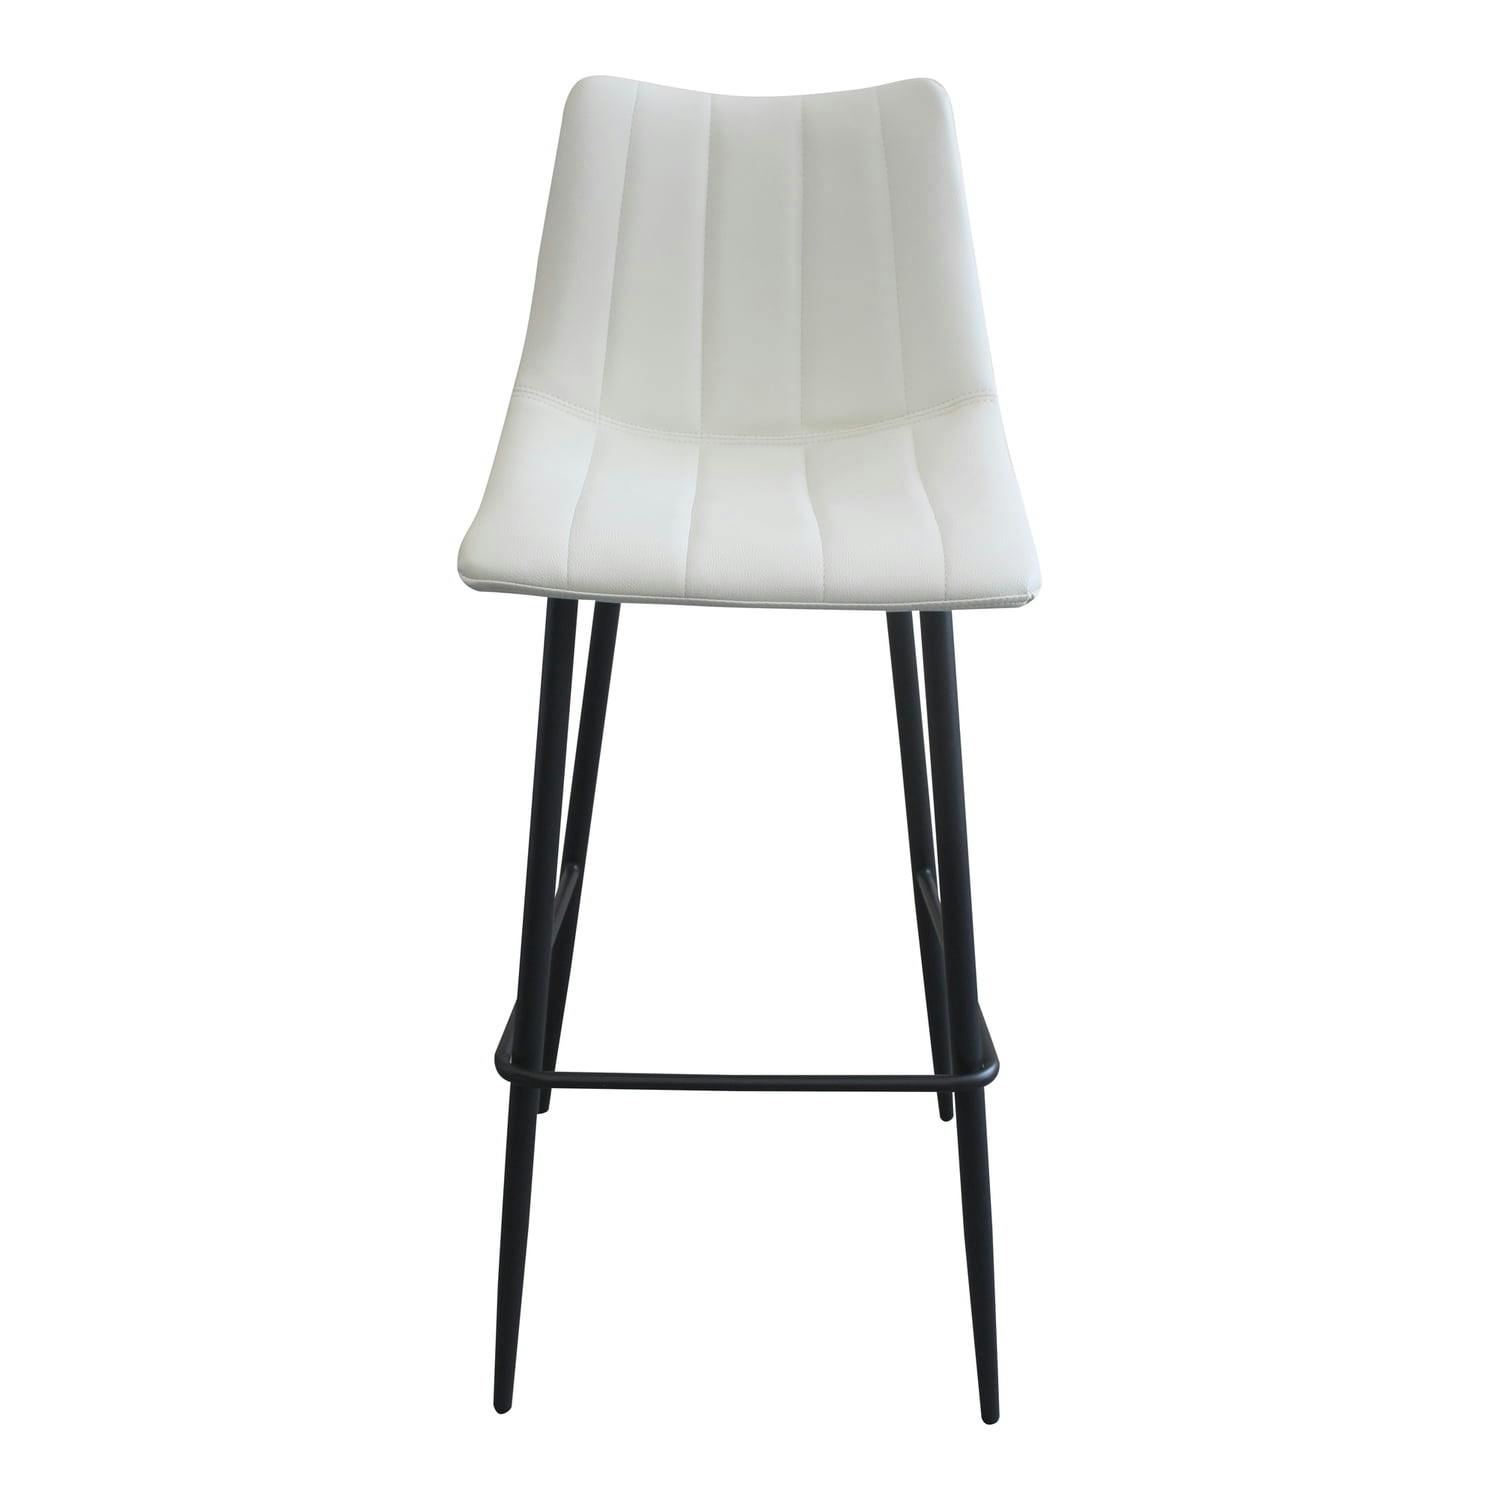 Contemporary Ivory White Faux Leather Bar Stool with Metal Legs